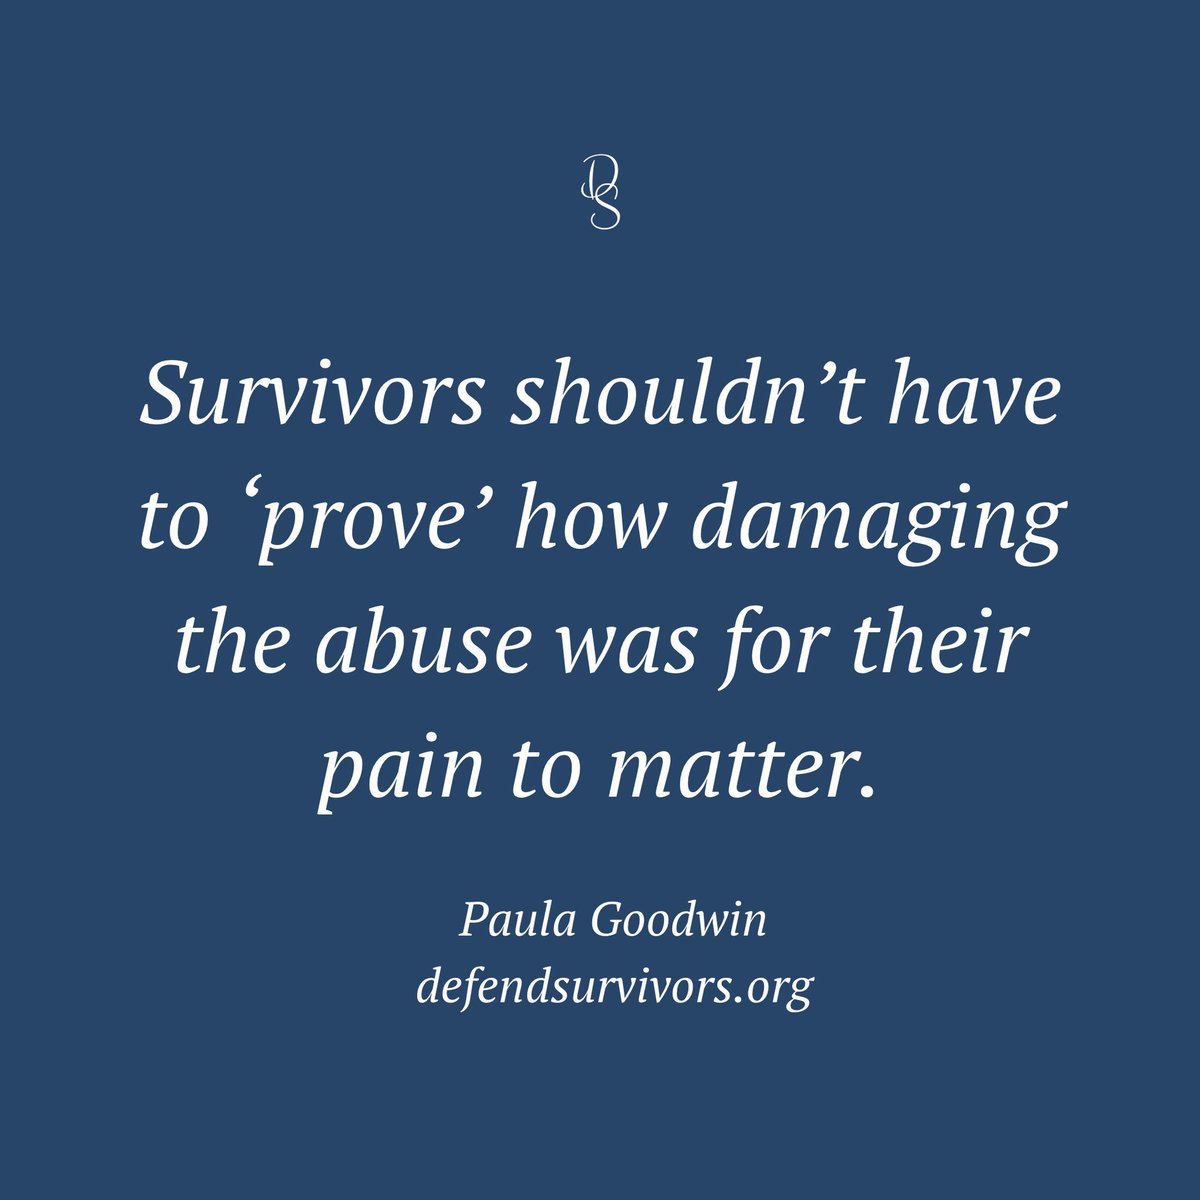 Survivors shouldn't have to ‘prove' how damaging the abuse was for their pain to matter.
#SAAM #ChildAbusePreventionMonth